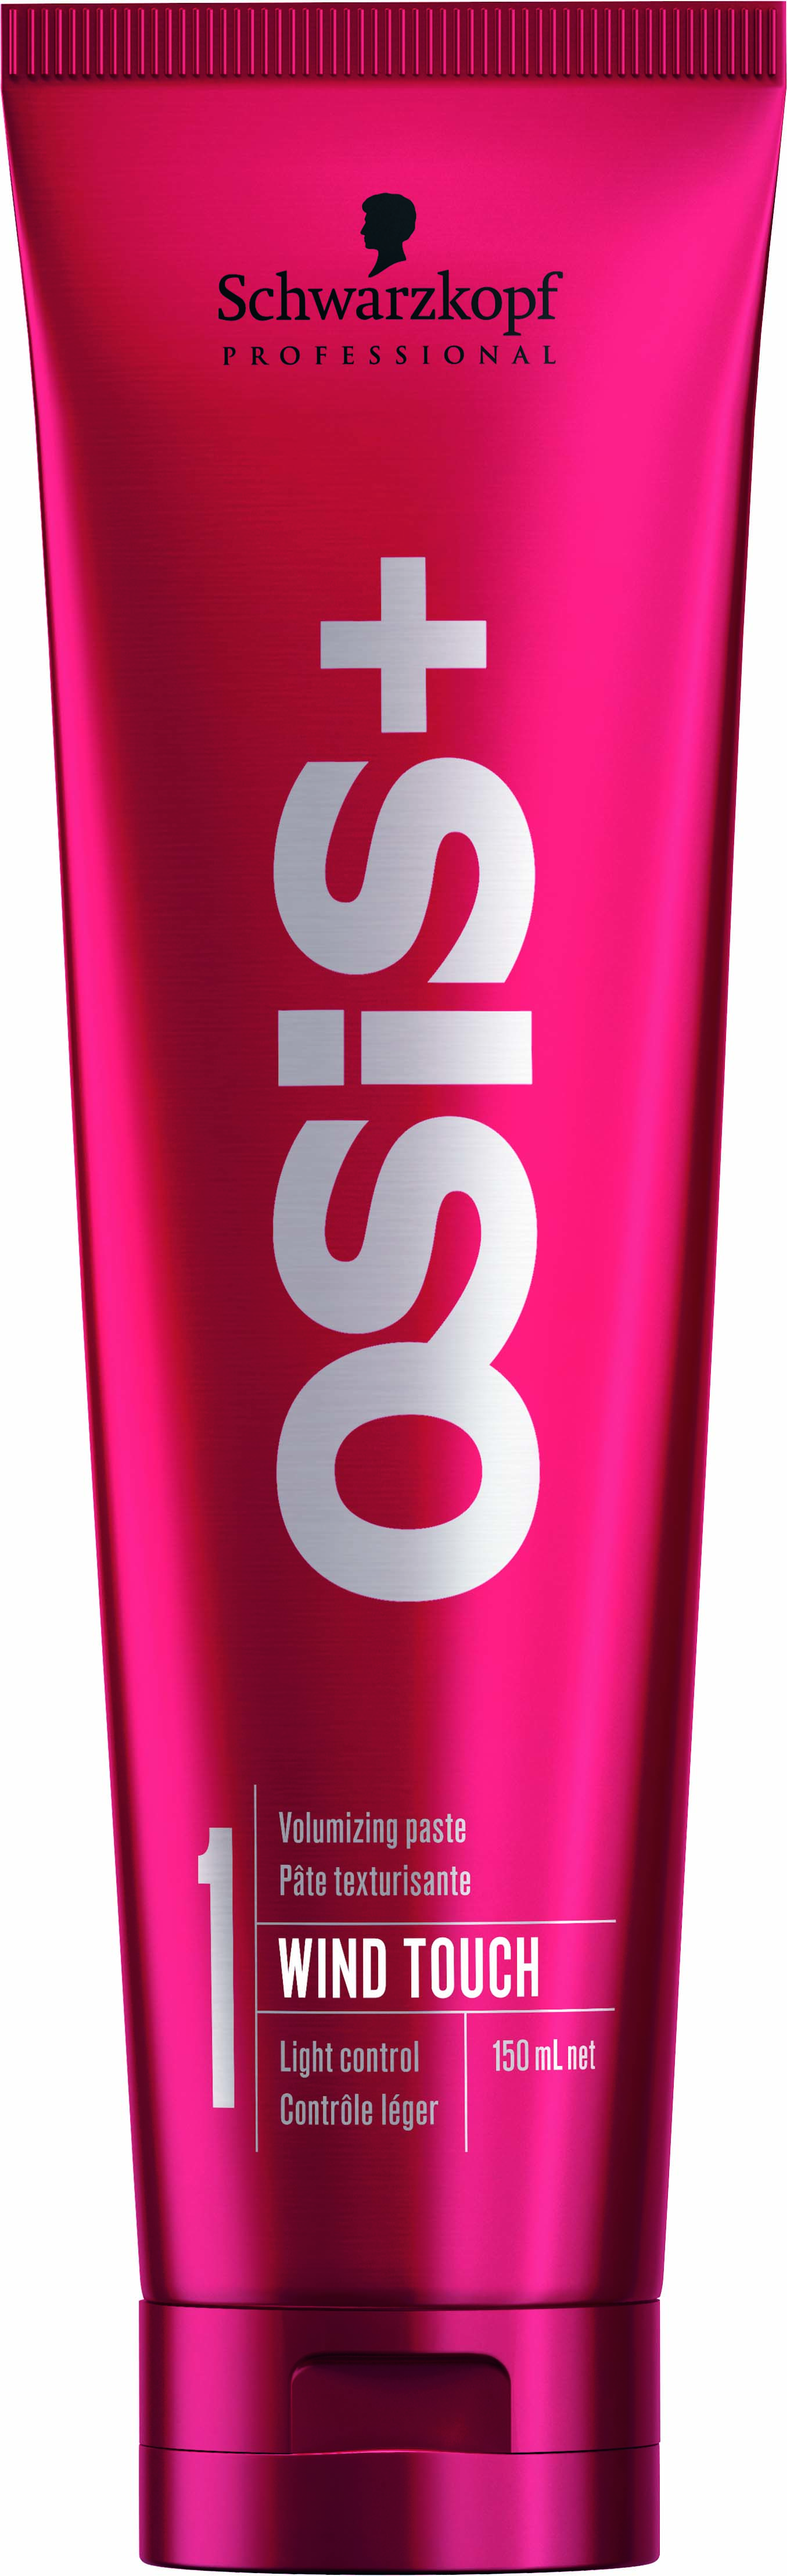 OSiS+ Wind Touch, 150 ml